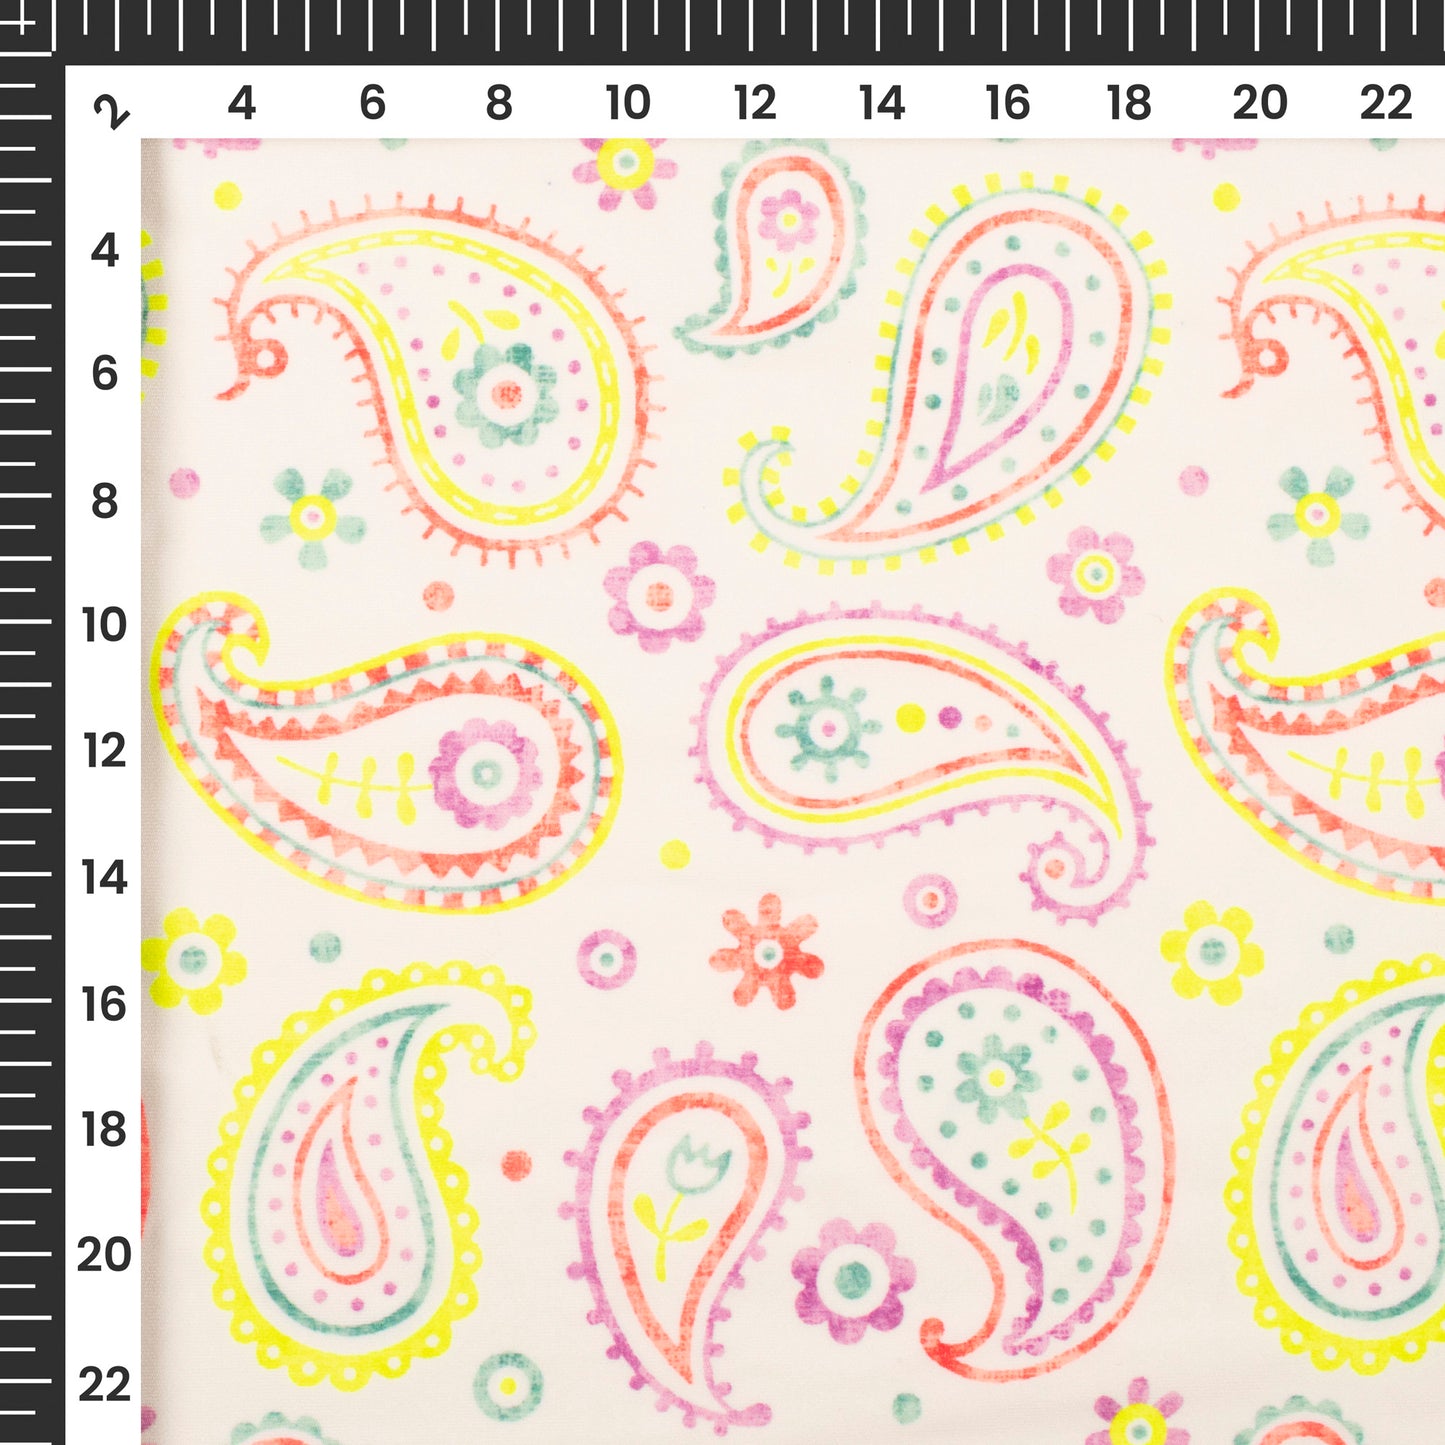 Neon Paisley Radiance Digital Print Lycra Fabric (Width 58 Inches)